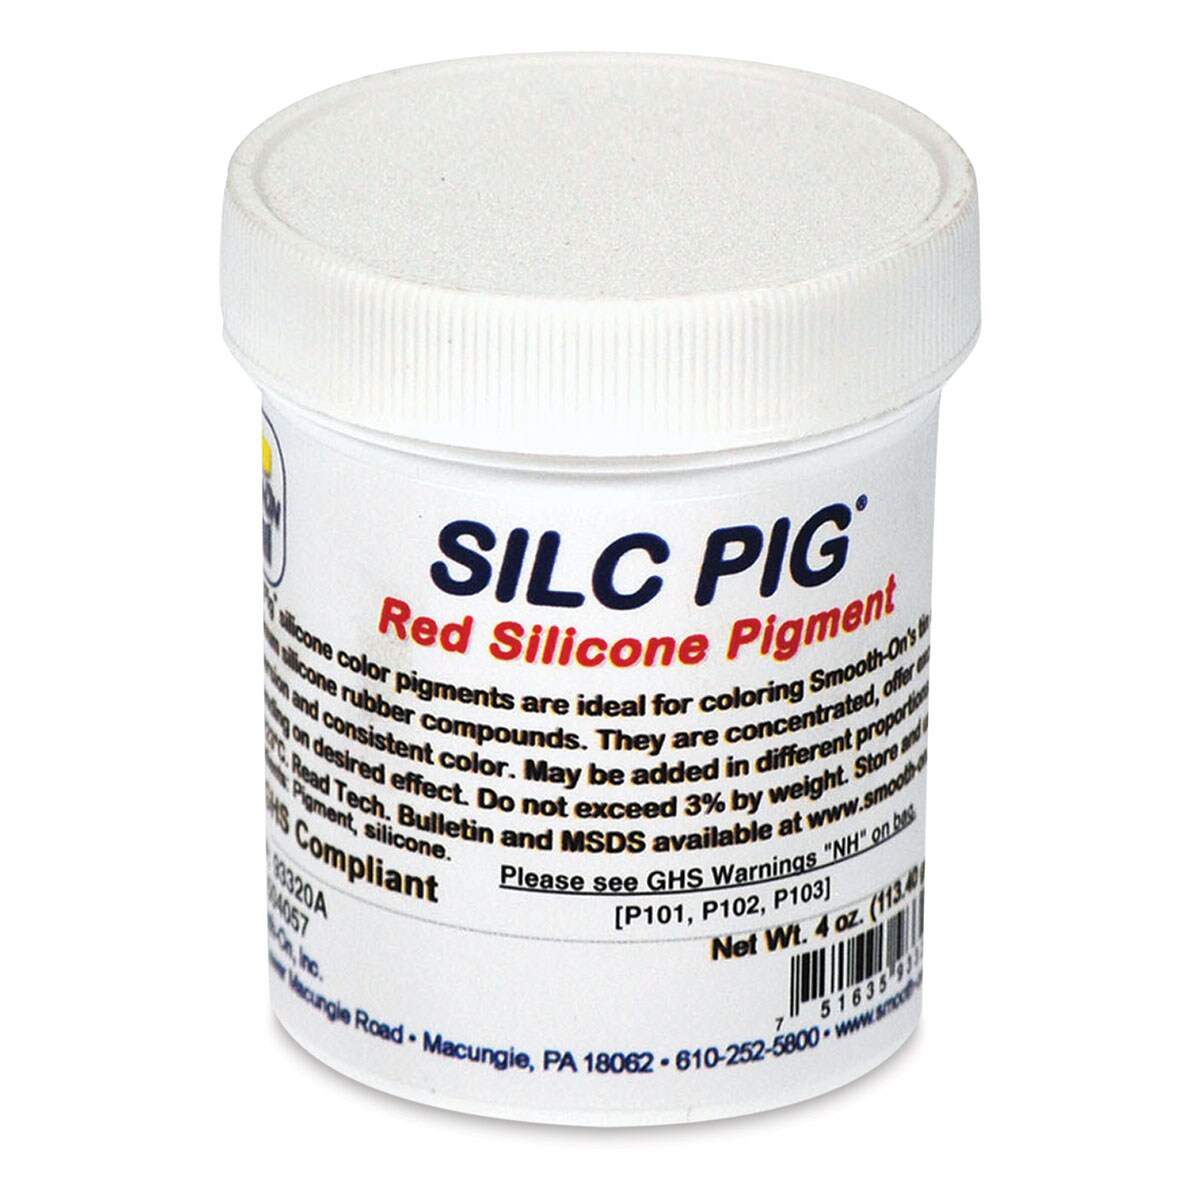 Smooth-On Silc Pig Silicone Color Pigment - Red, 4 oz